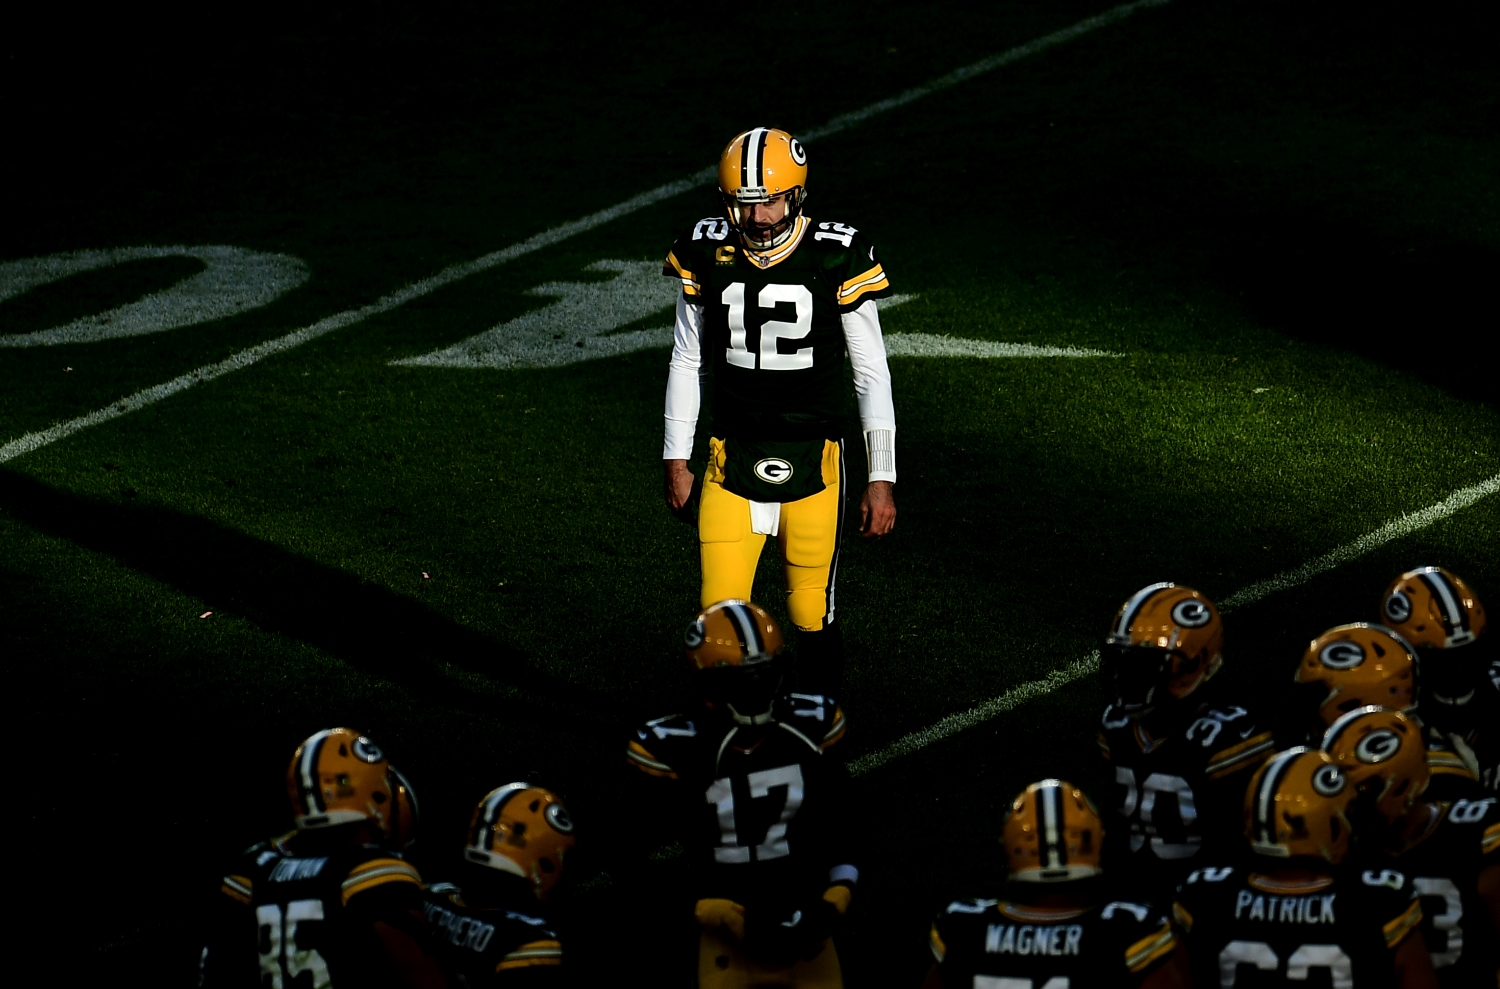 Green Bay Packers quarterback Aaron Rodgers stands a few feet away from his teammates as they huddle.